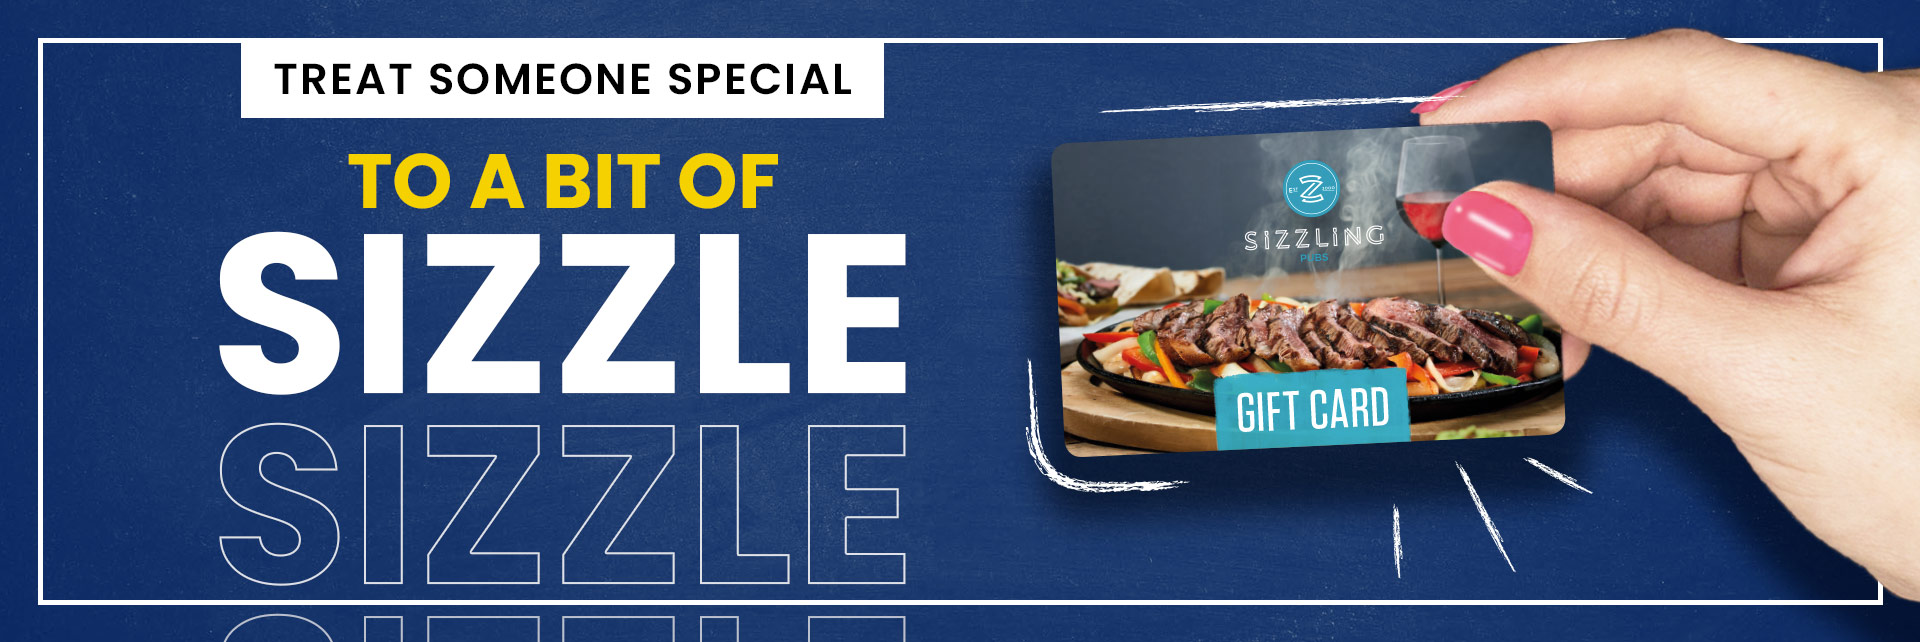 Sizzling Pubs Gift Card at Hare & Hounds, Warrington in Warrington